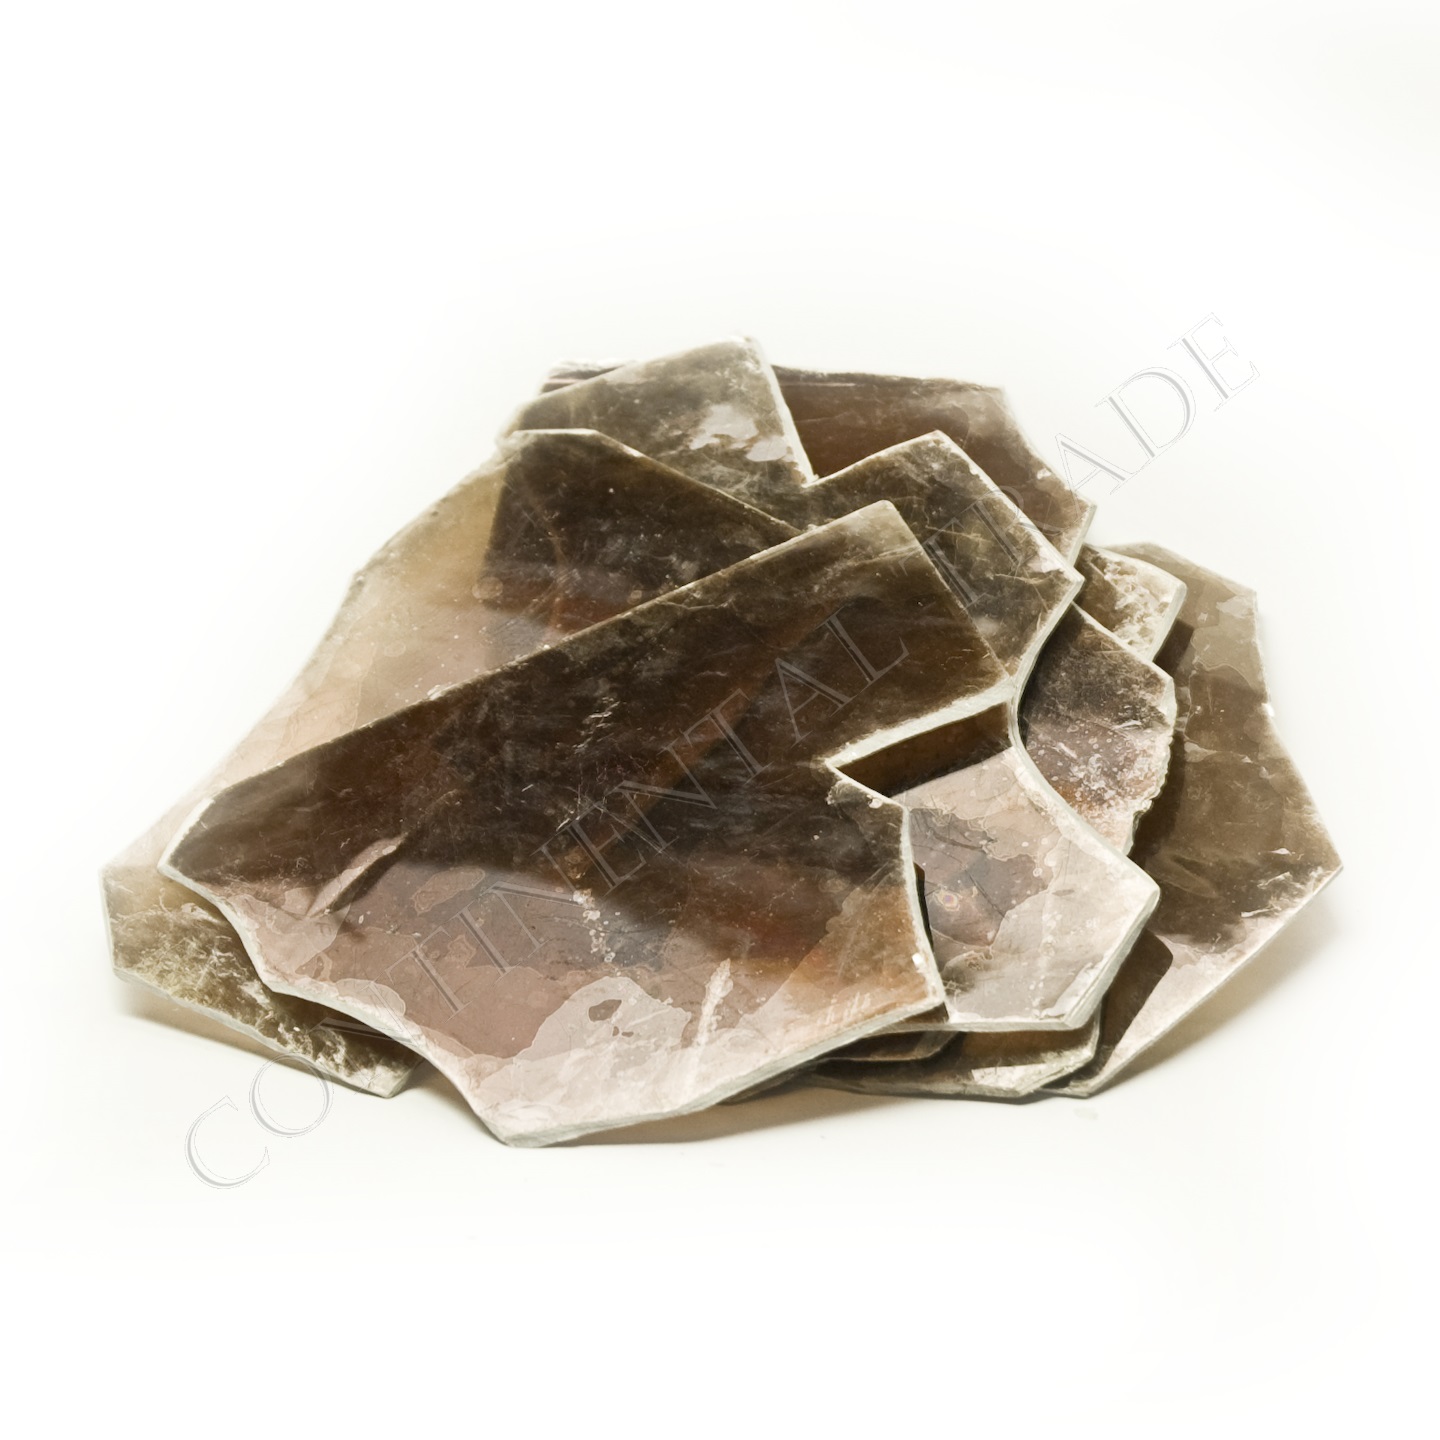 Best Mica Mineral in India  Buy Mica Sheets, Mica Flakes, Fabricated mica